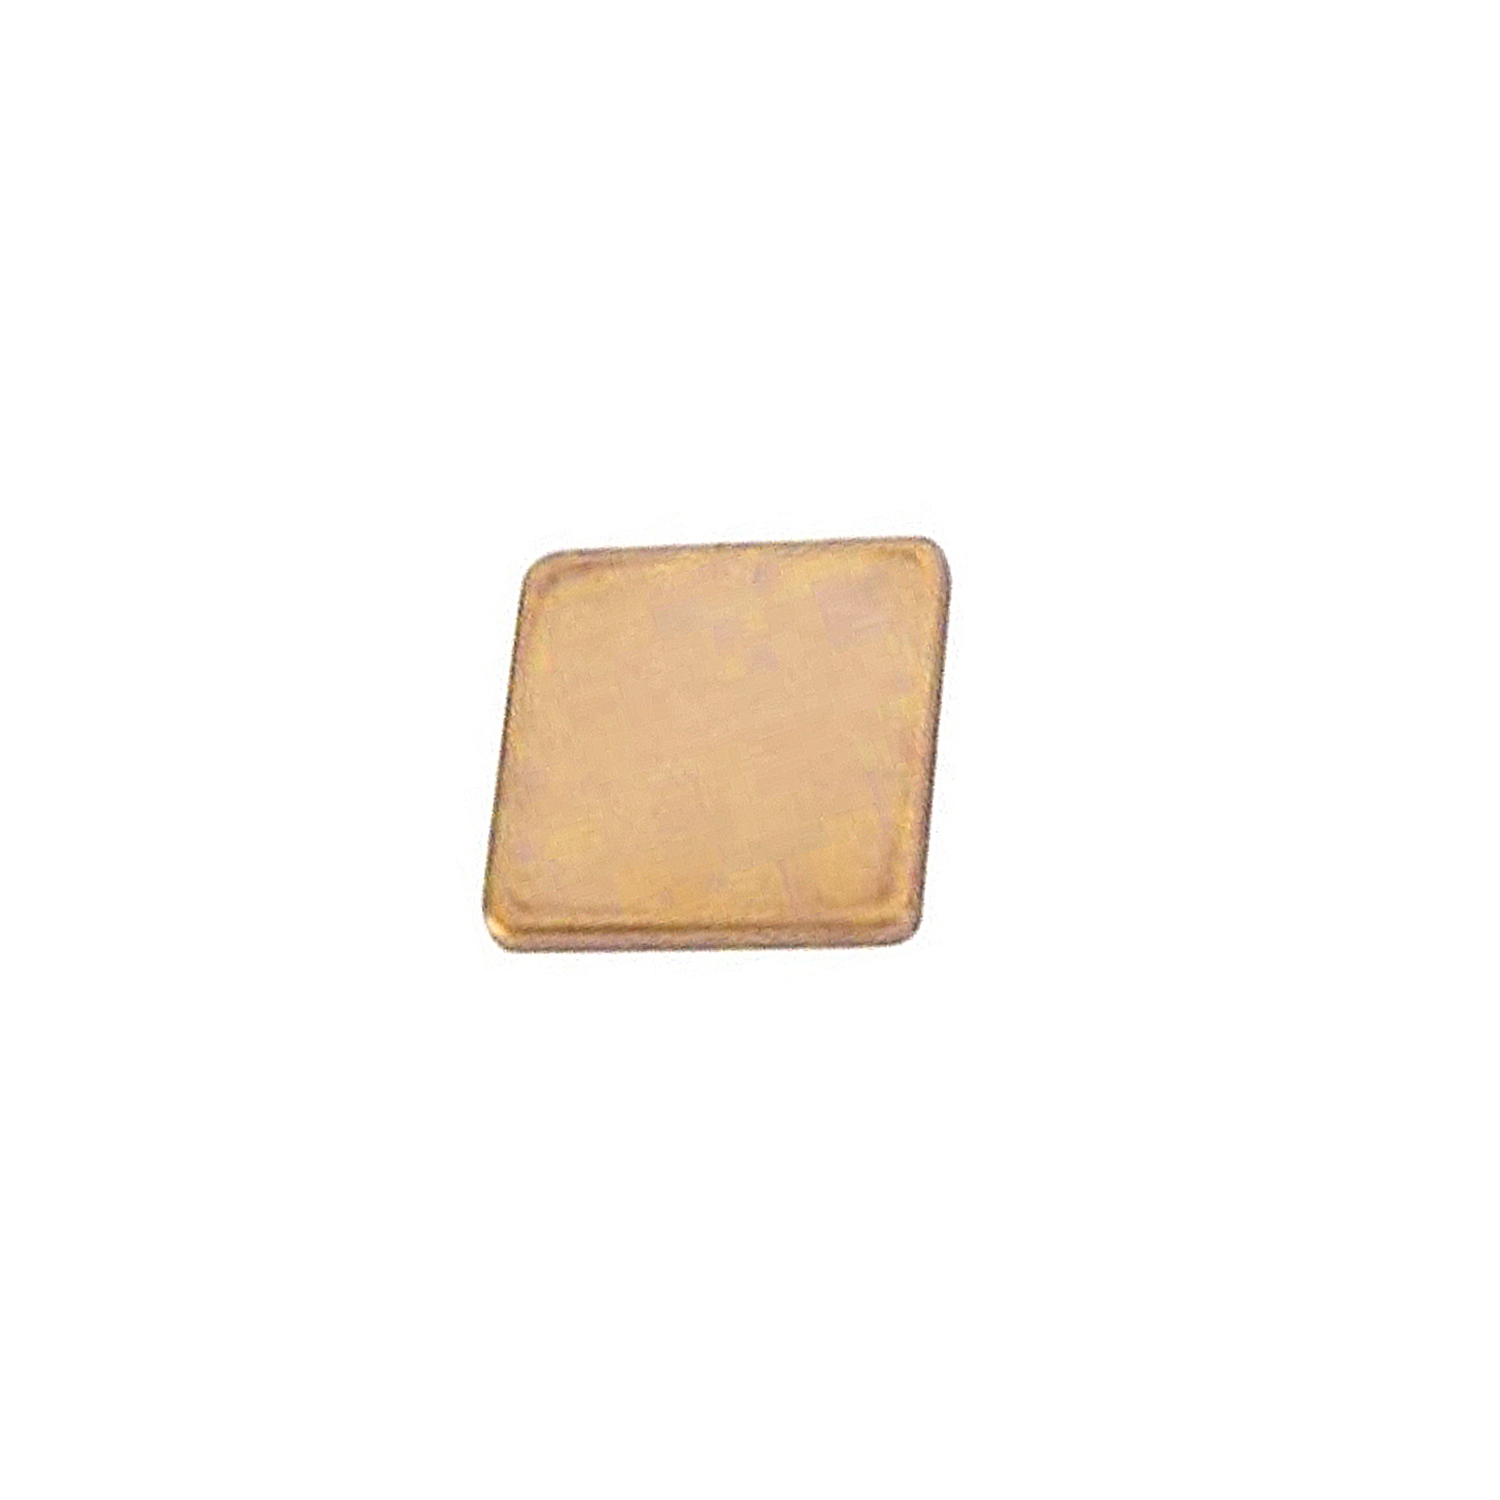 Copper Slice Radiator For Phone Tablet PC Repair Chip Cooling 2x2cm Thickness 1.2mm